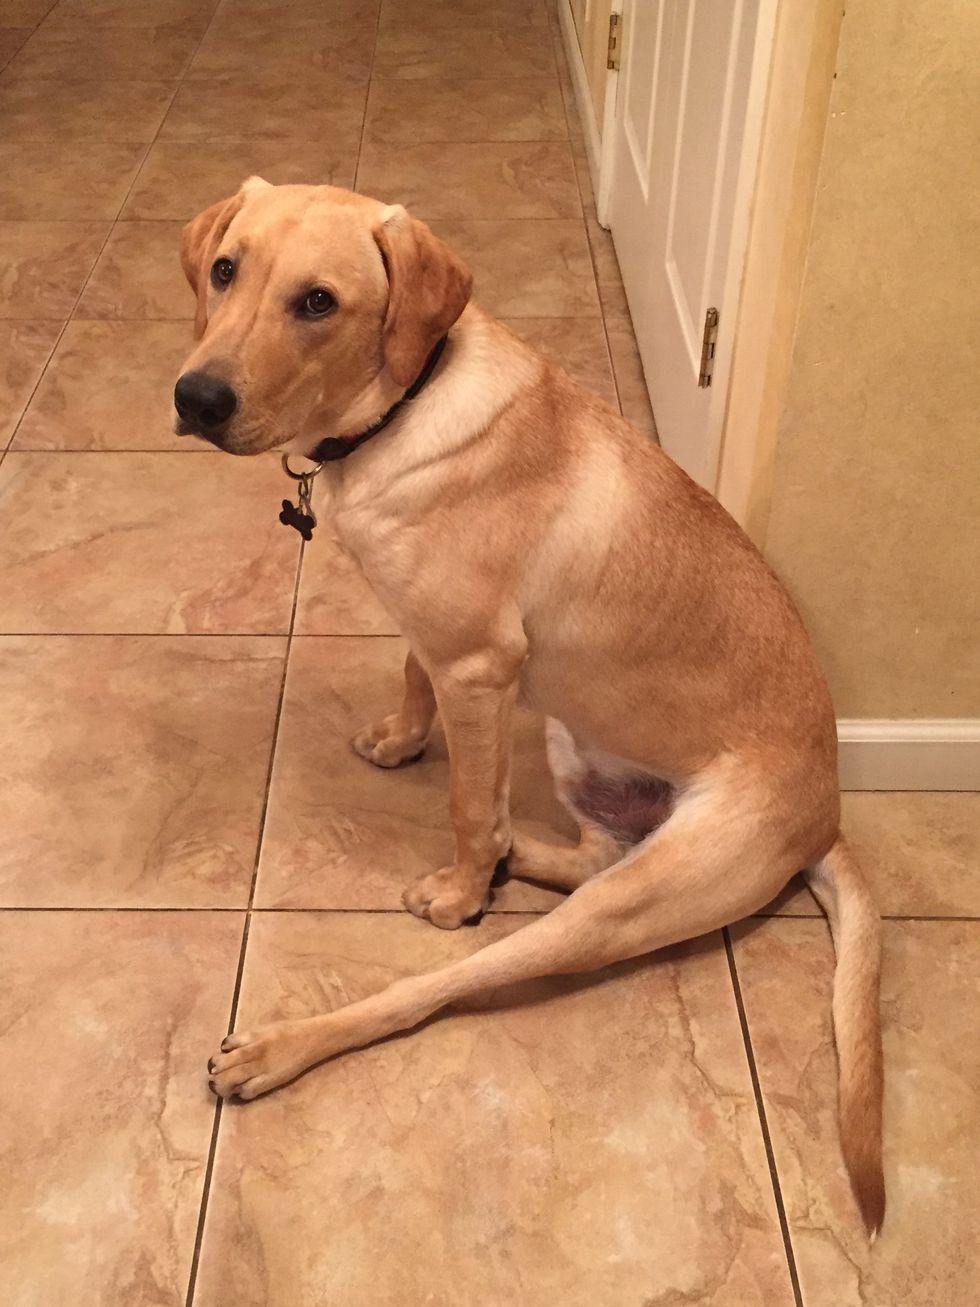 9 Things Your Dog Does That You Simply Cannot Resist